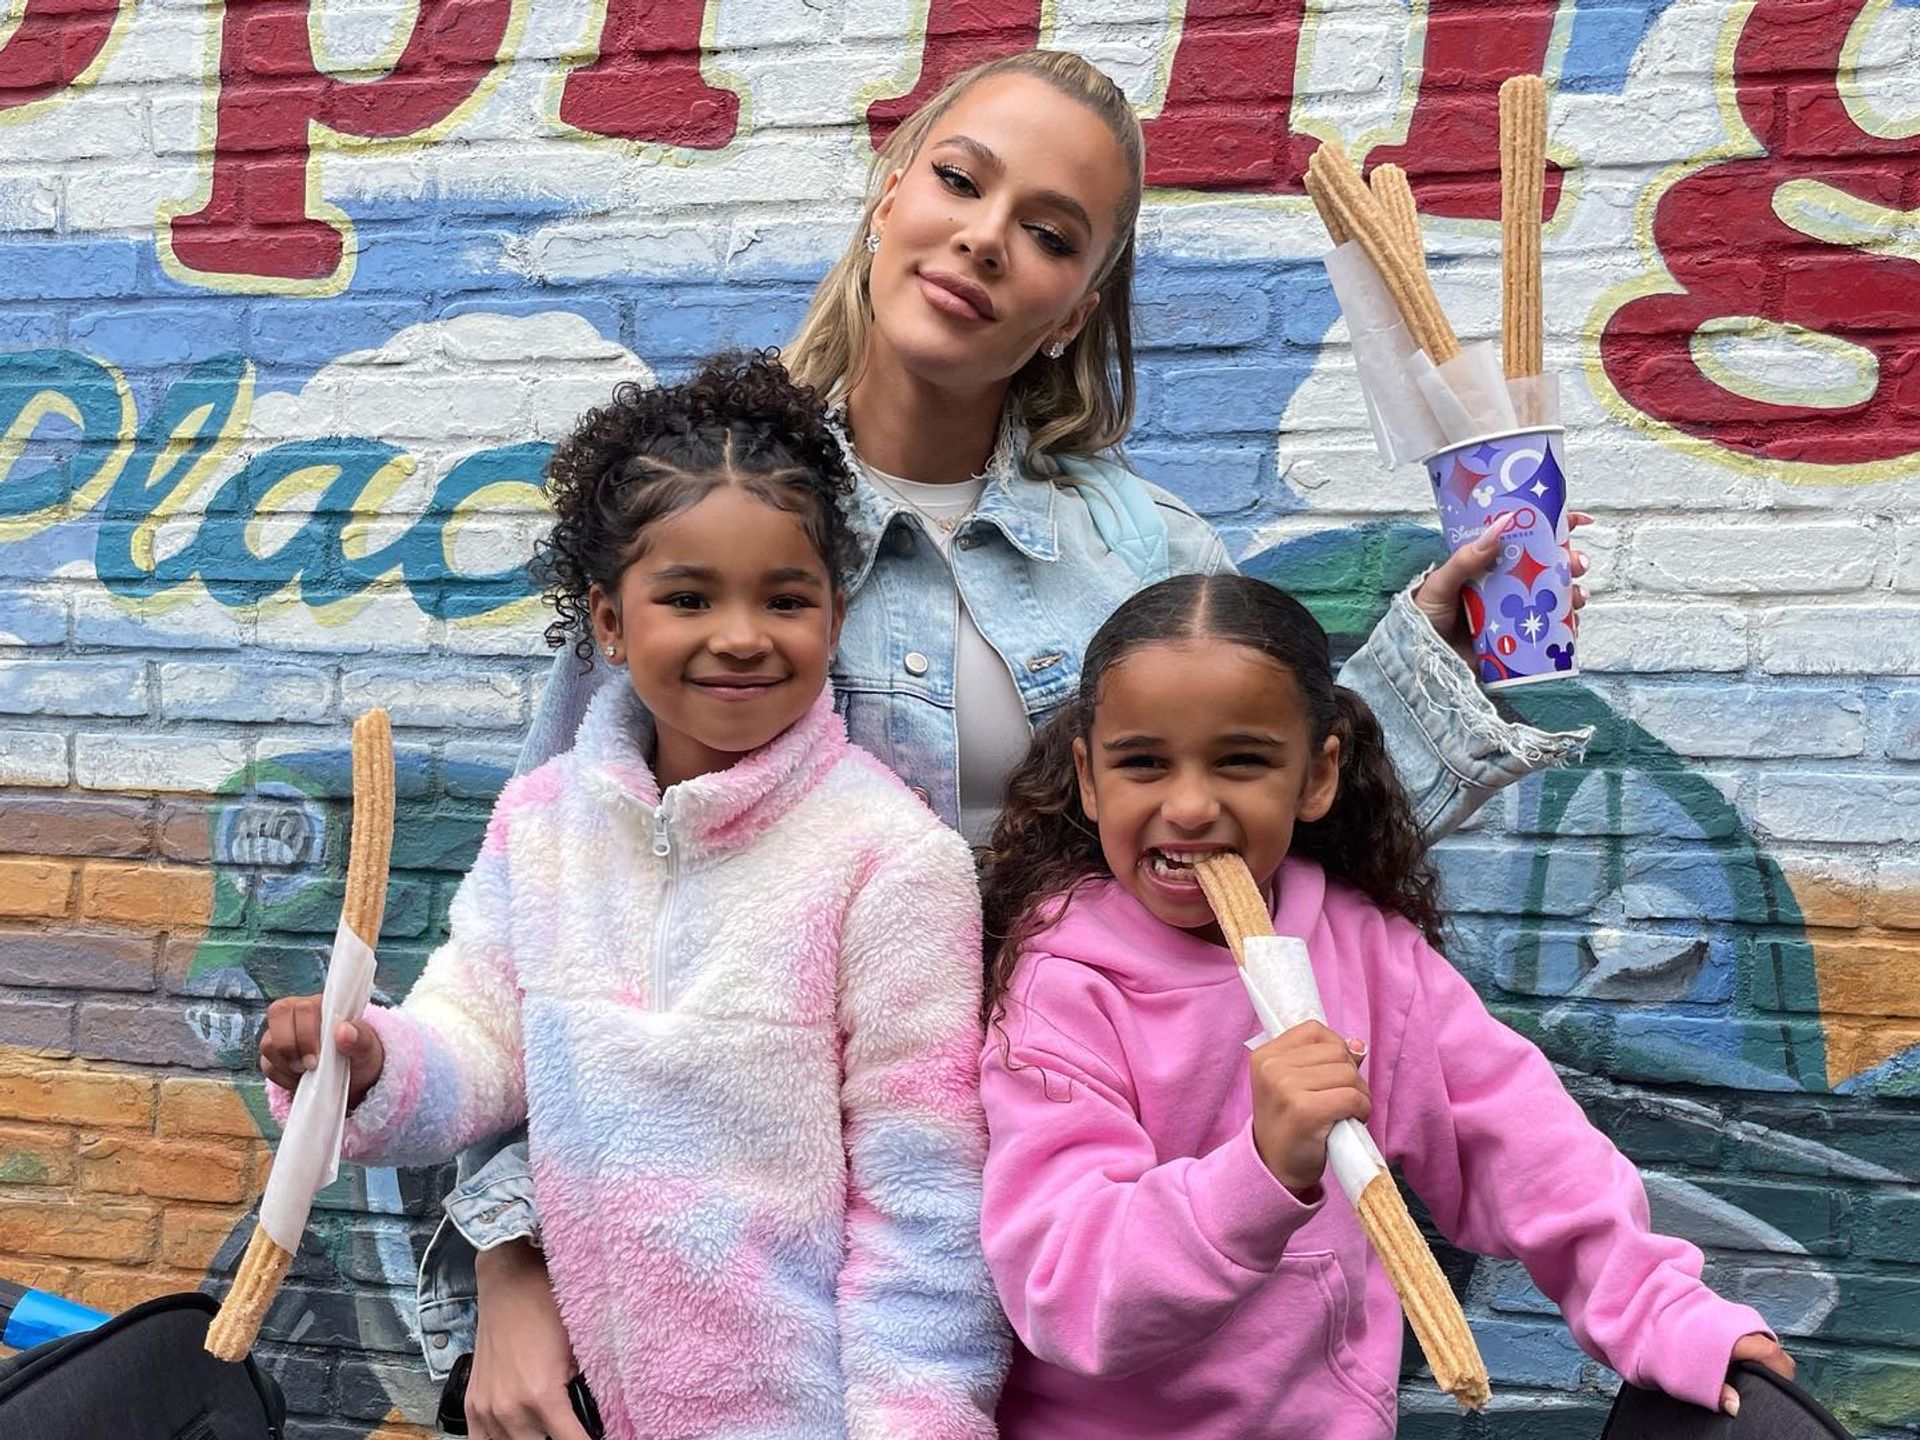 Khloé Kardashian's Daughter True Stands Tall as She Poses with Cousin Dream